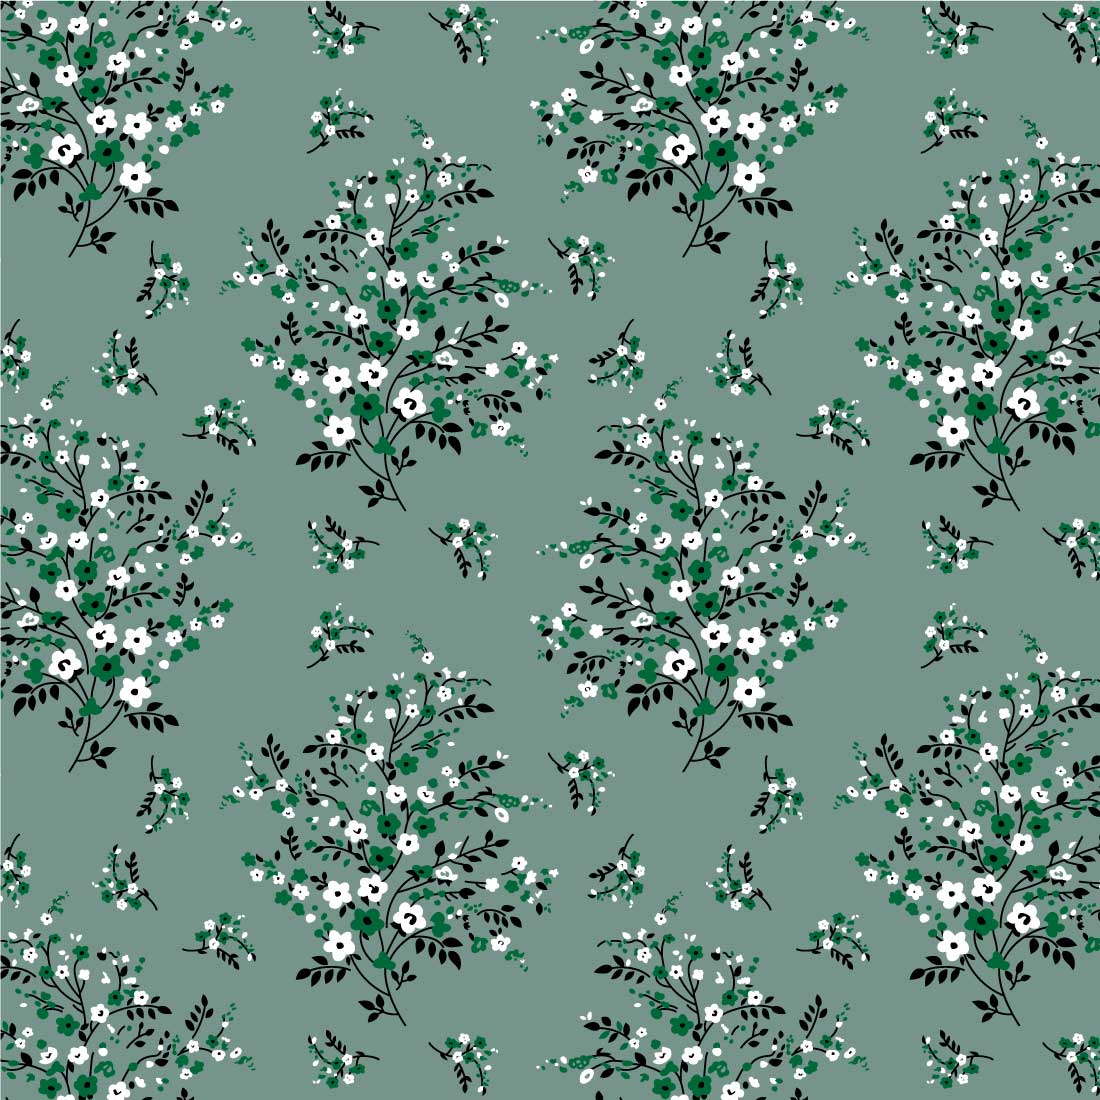 Green background with white and black flowers.